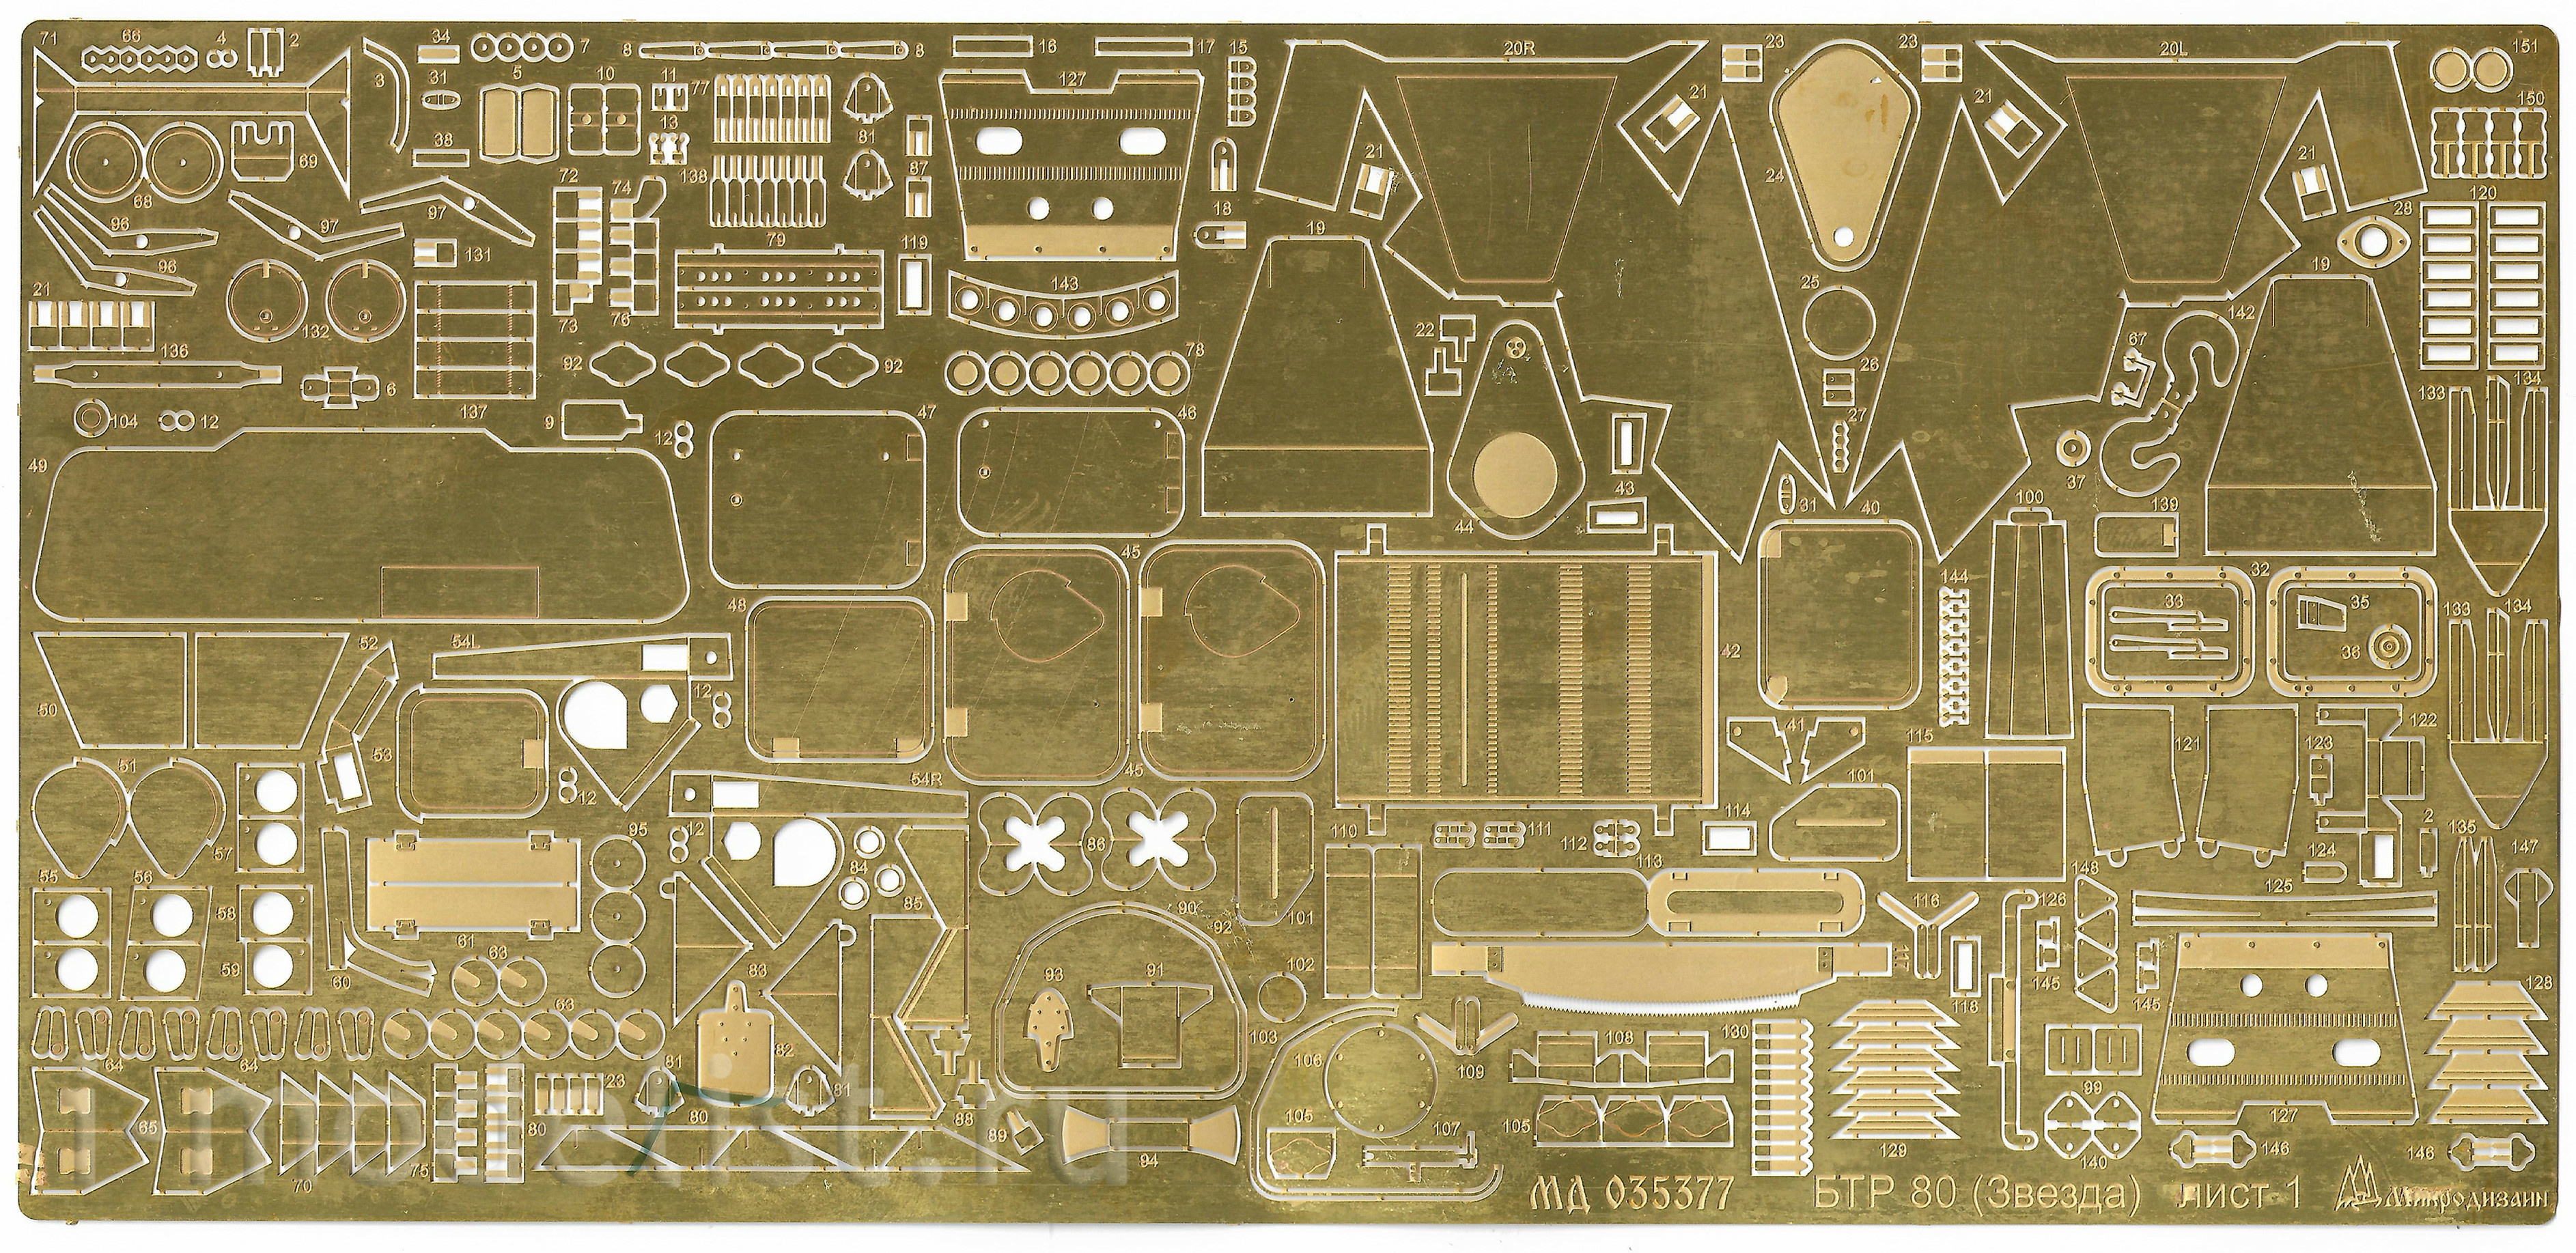 035377 Microdesign 1/35 Kit of photo-etched parts on the BTR-80 from the Zvezda.